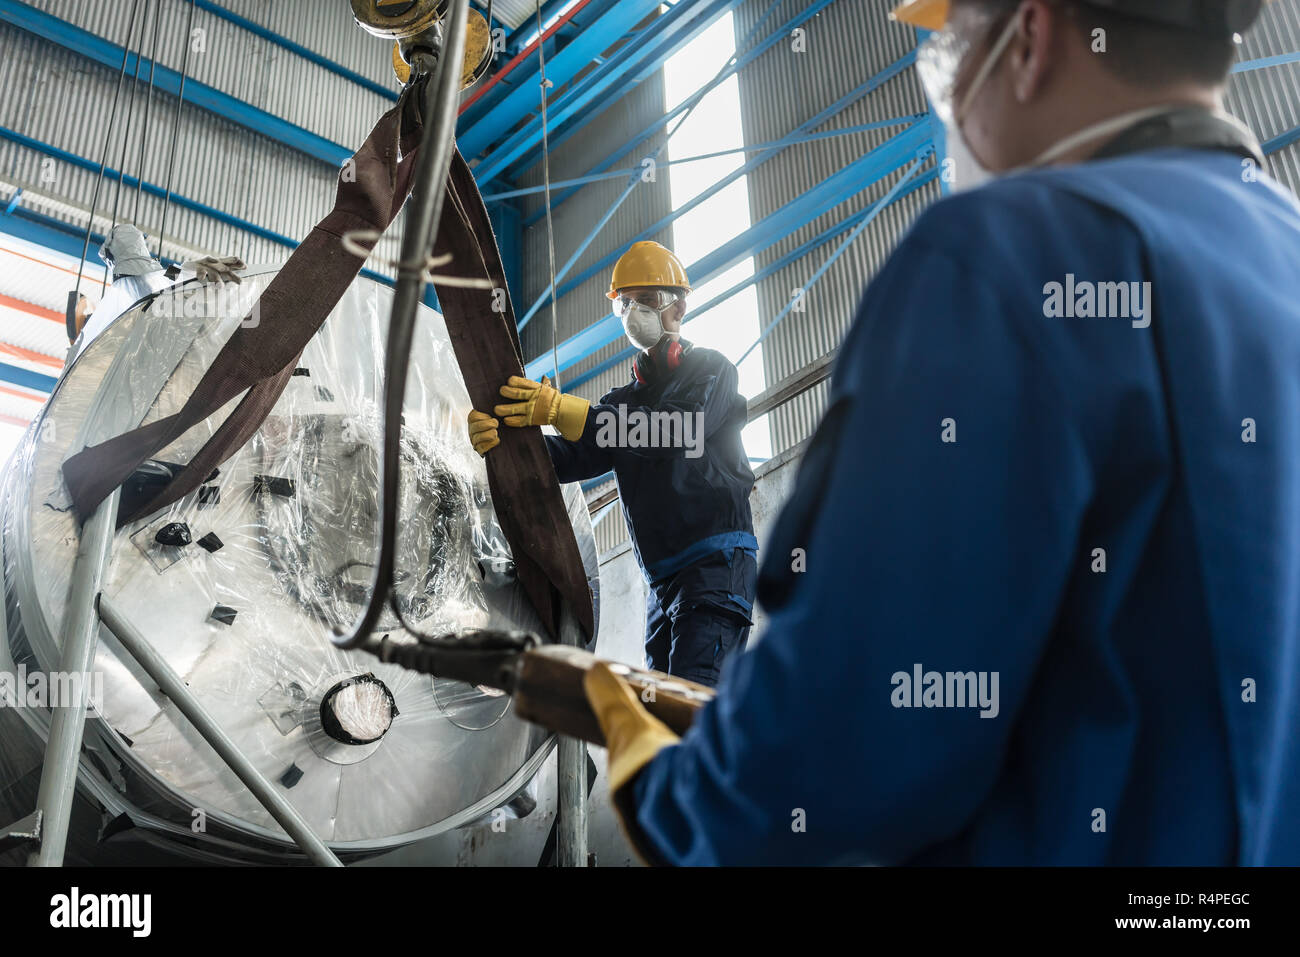 Workers handling equipment for lifting industrial boilers Stock Photo